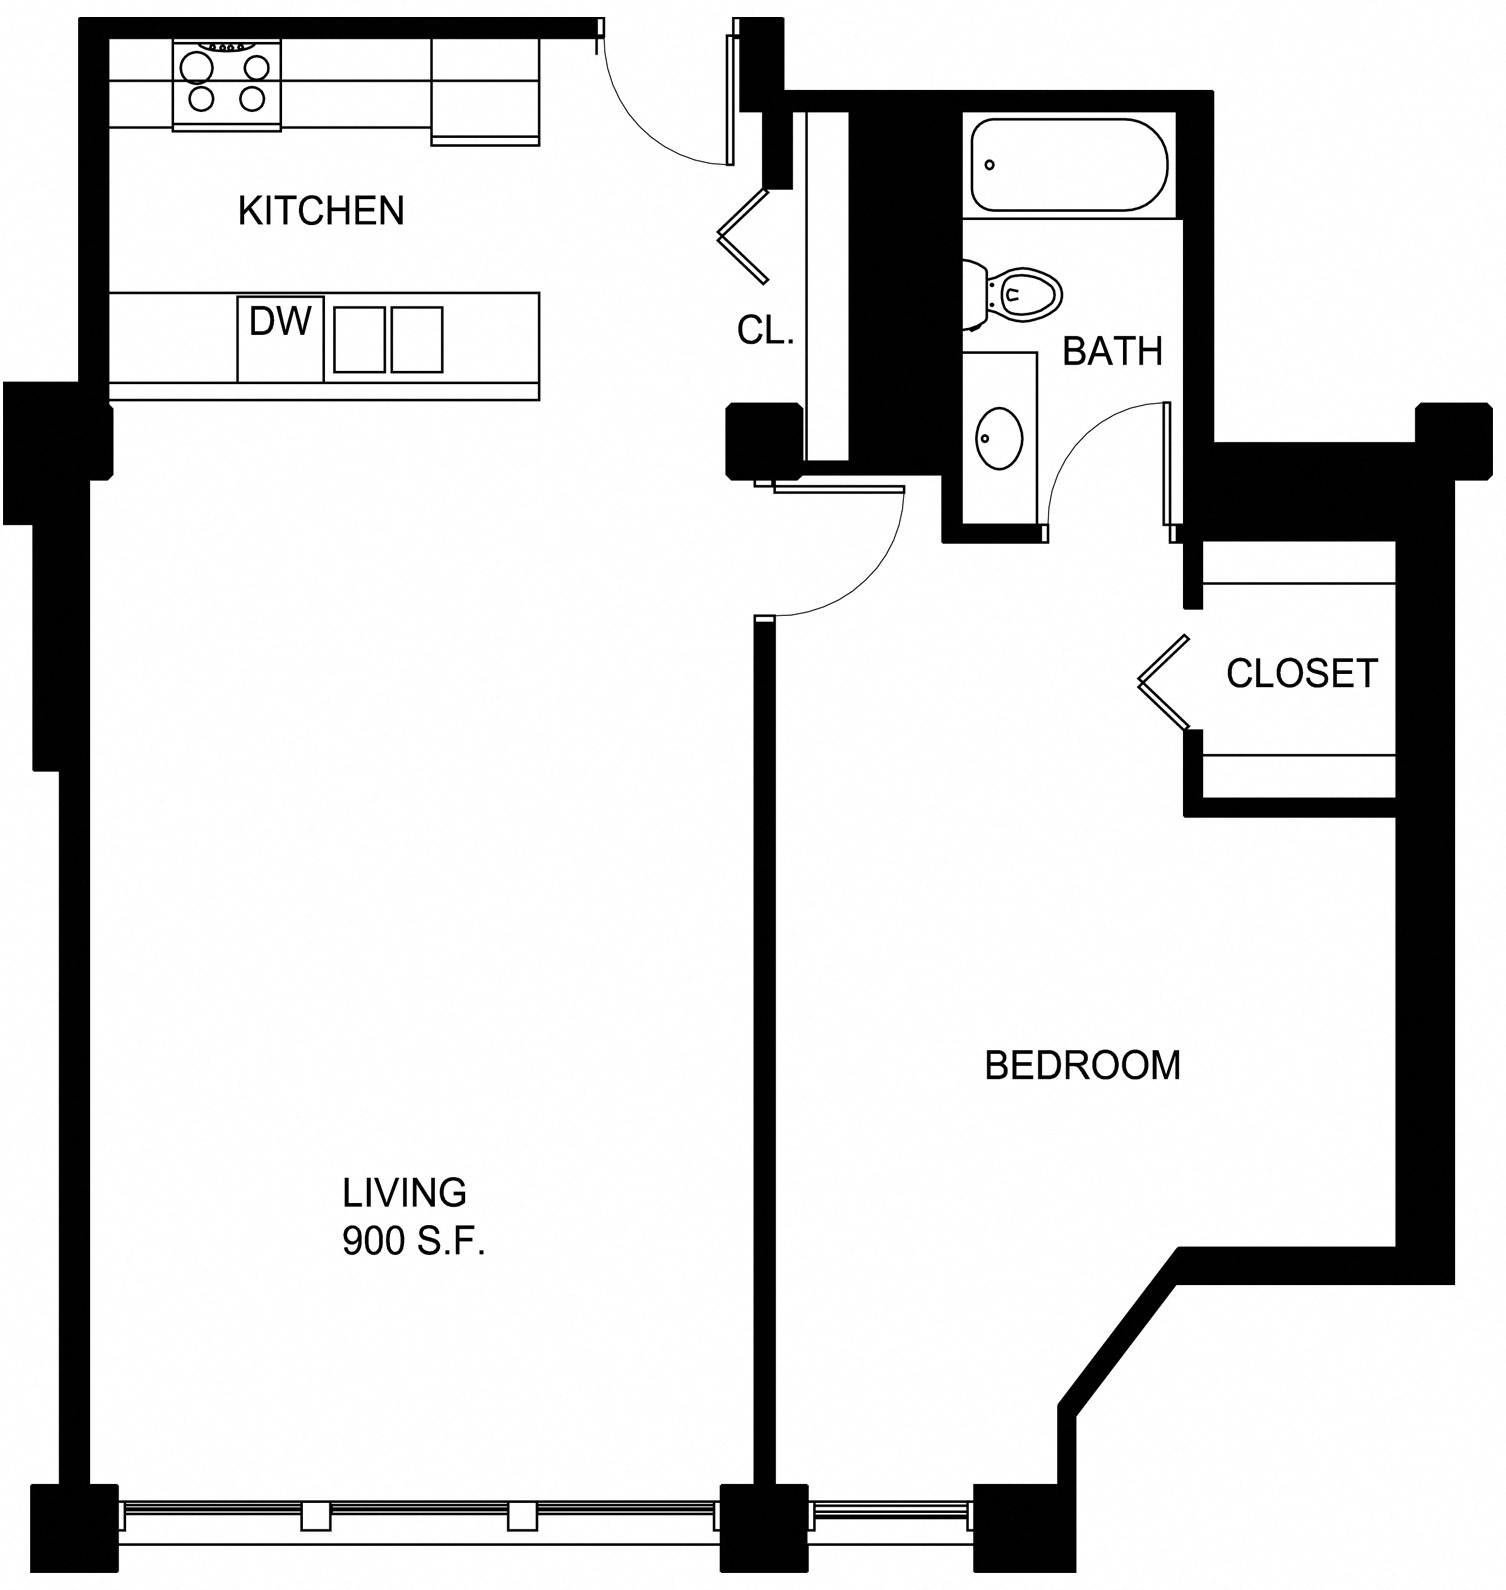 Floorplan for Apartment #P460, 1 bedroom unit at Halstead Providence